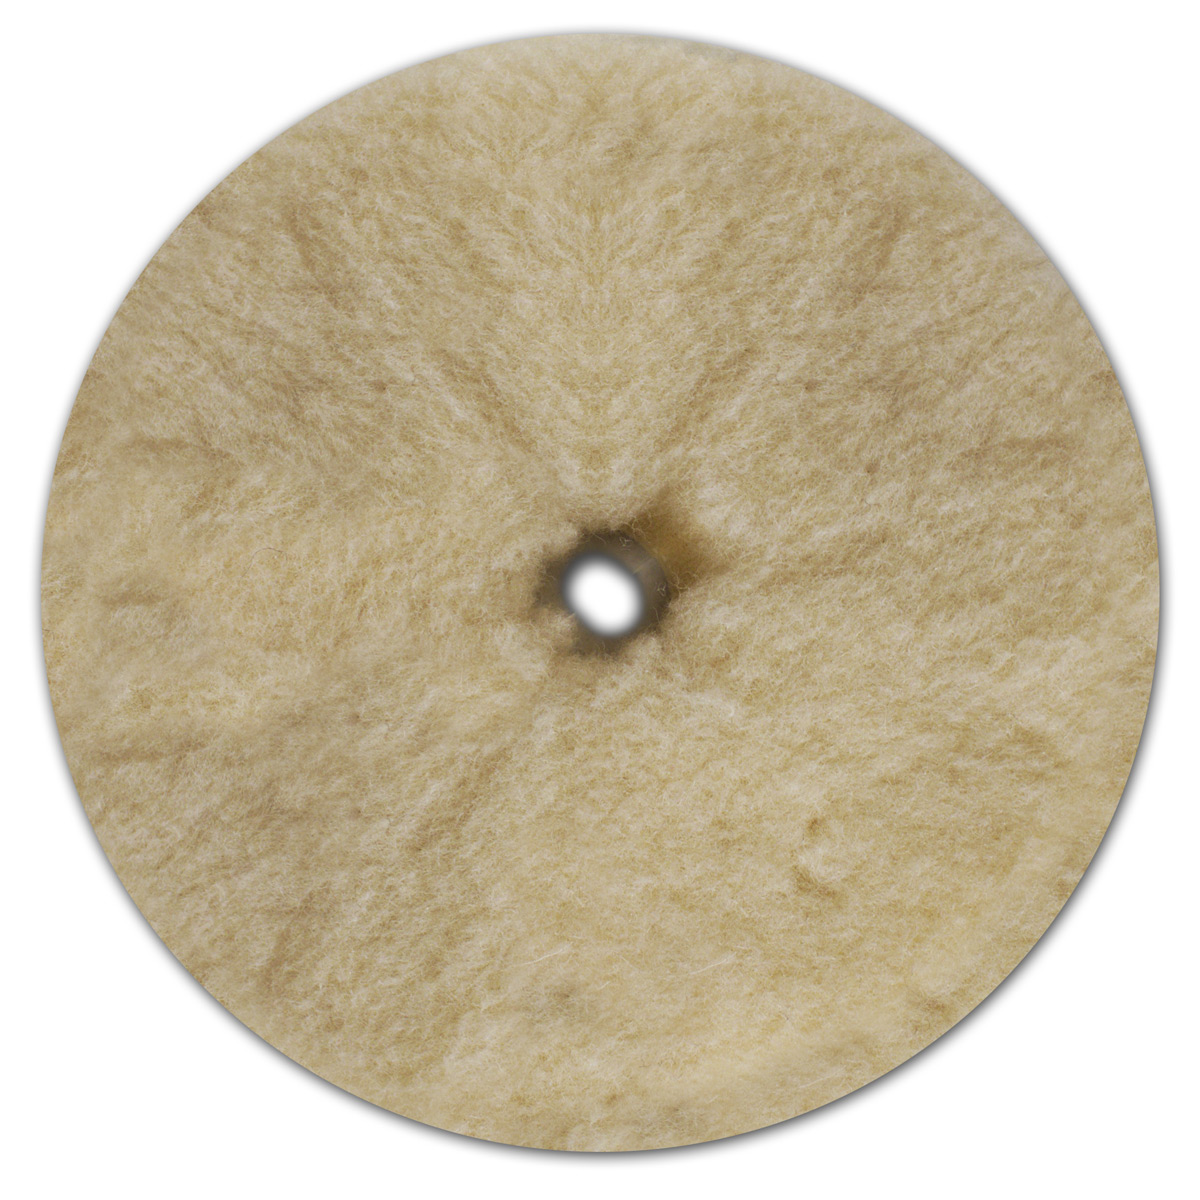 Prewashed Lambswool Buffing Pad – 4.75in